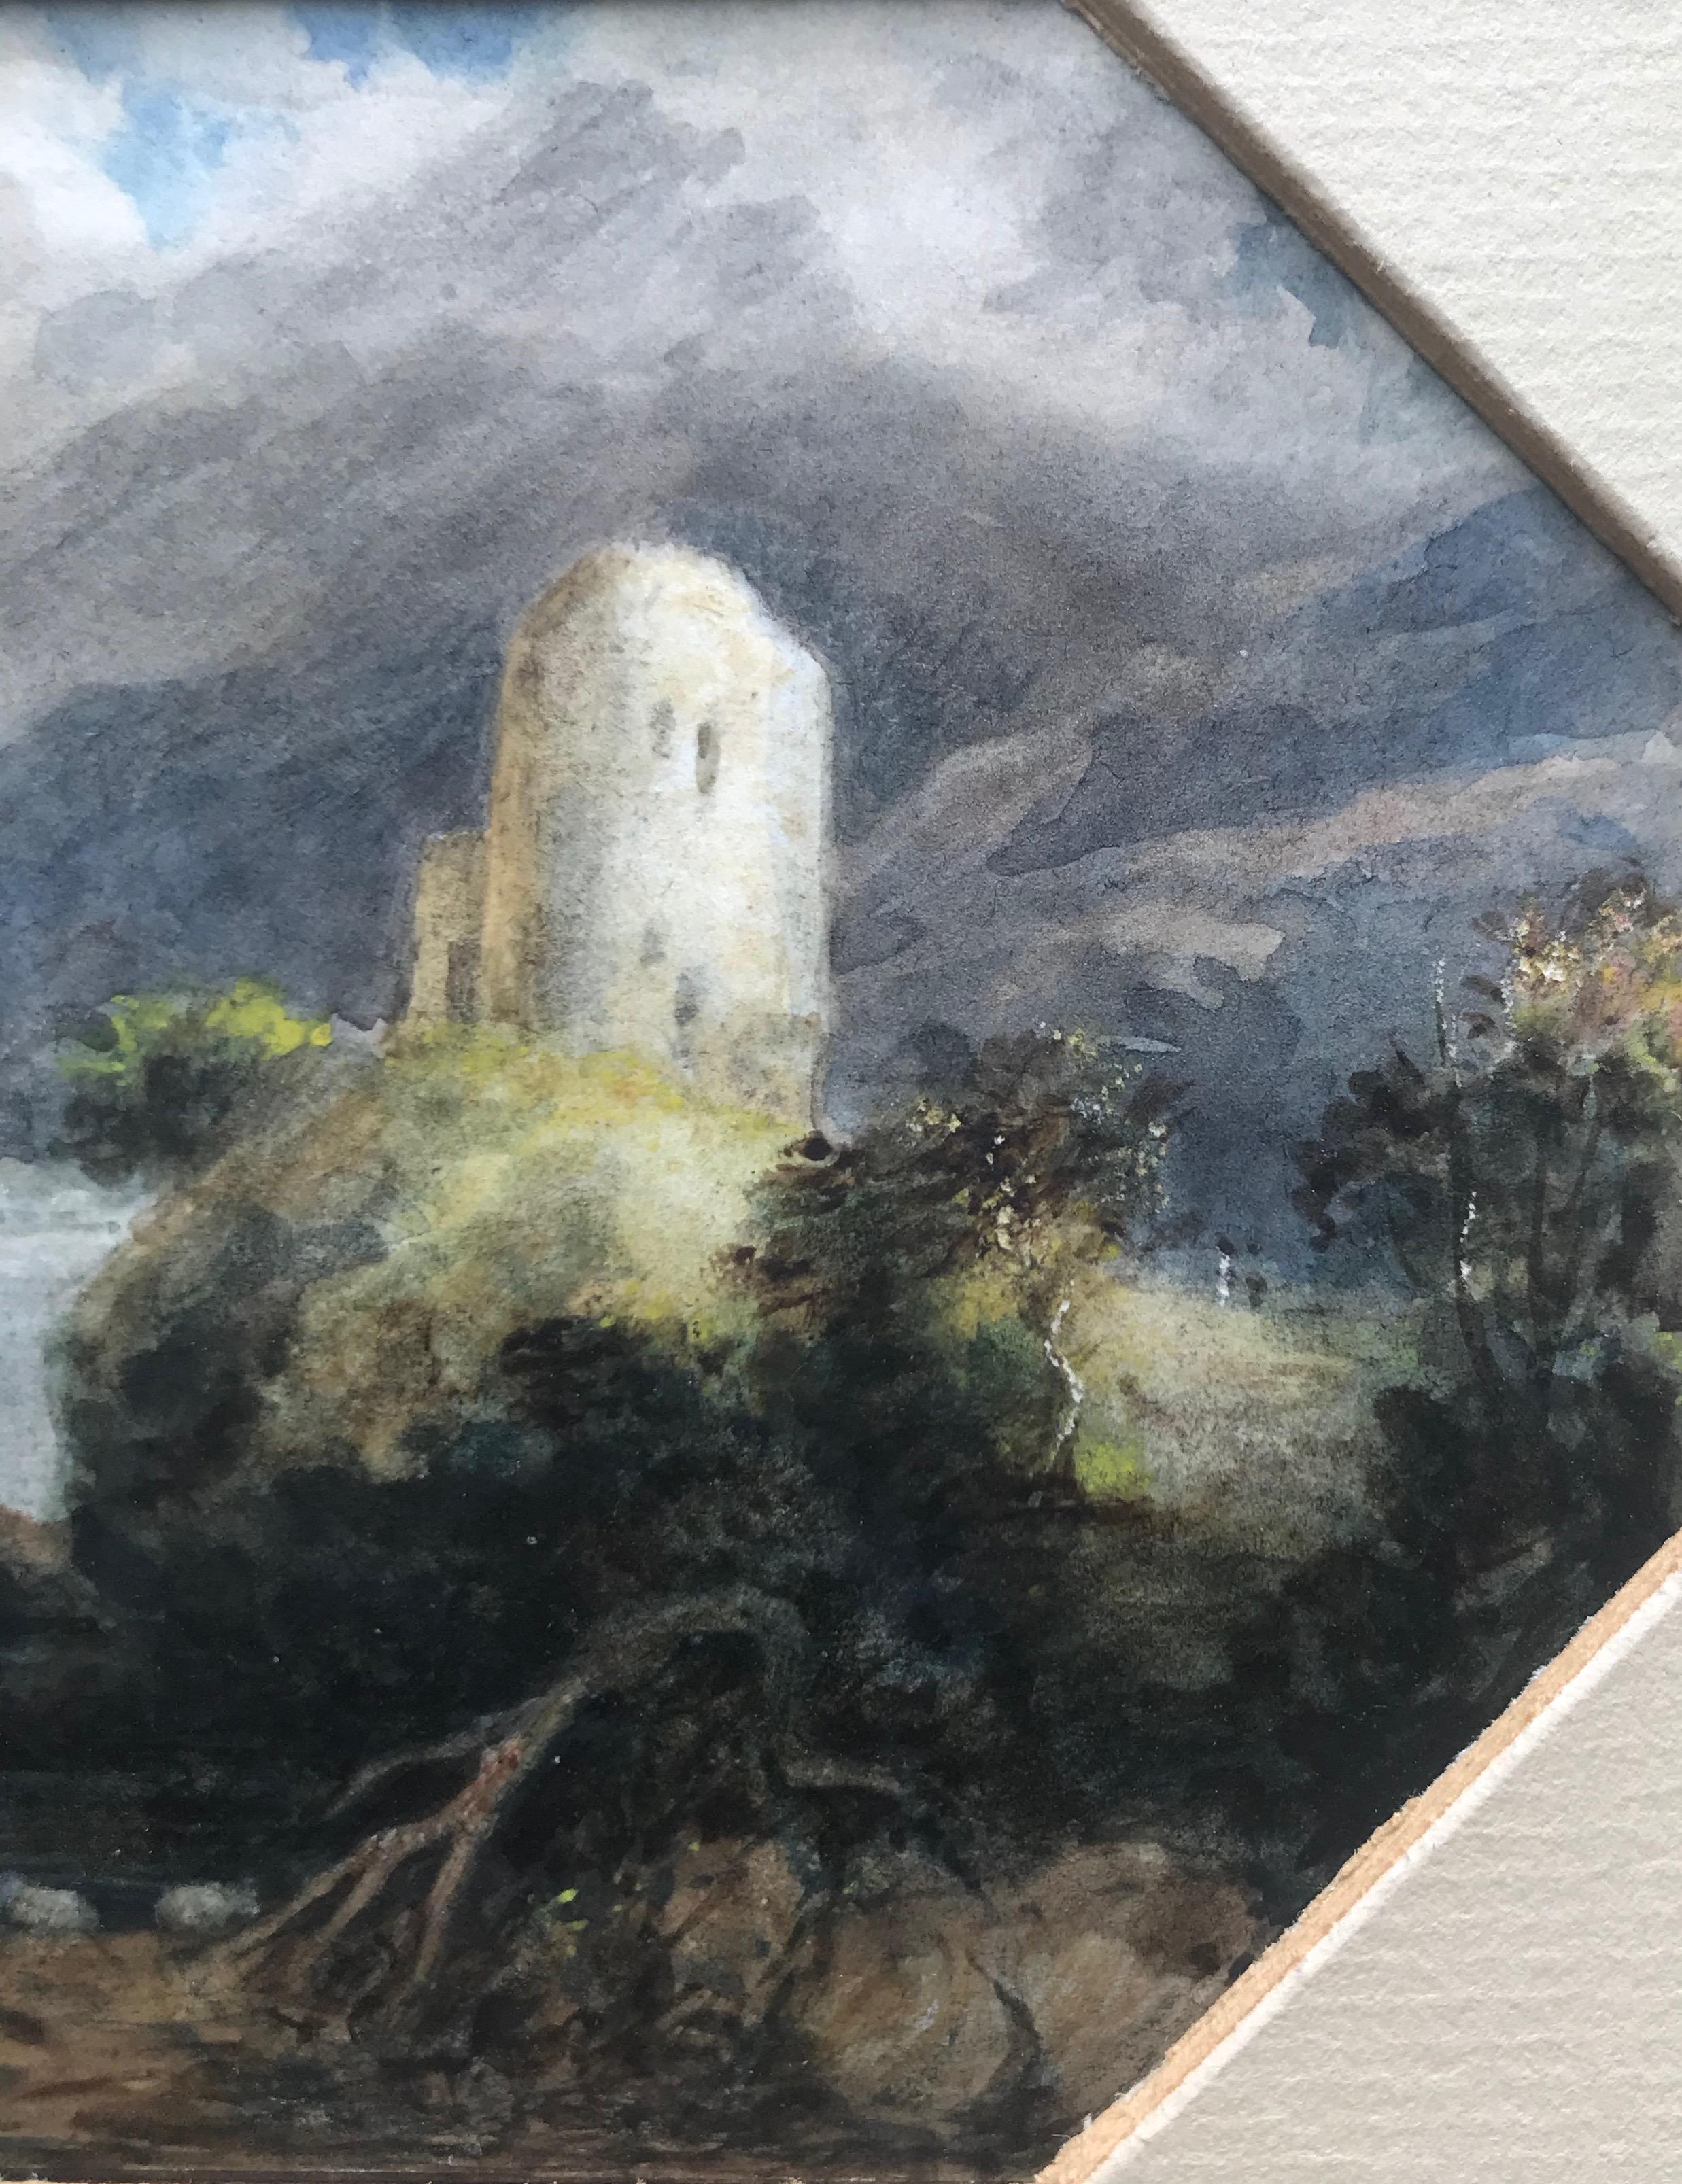 Follow of Joseph Mallord William Turner, mid 19th Century
The castle by the loch
Watercolour
Hexagonal  3 x 3¾ inches
6¾ x 9½ with frame

A very atmospheric view of a romantically set castle on the banks of a loch. The artist has captured a storm